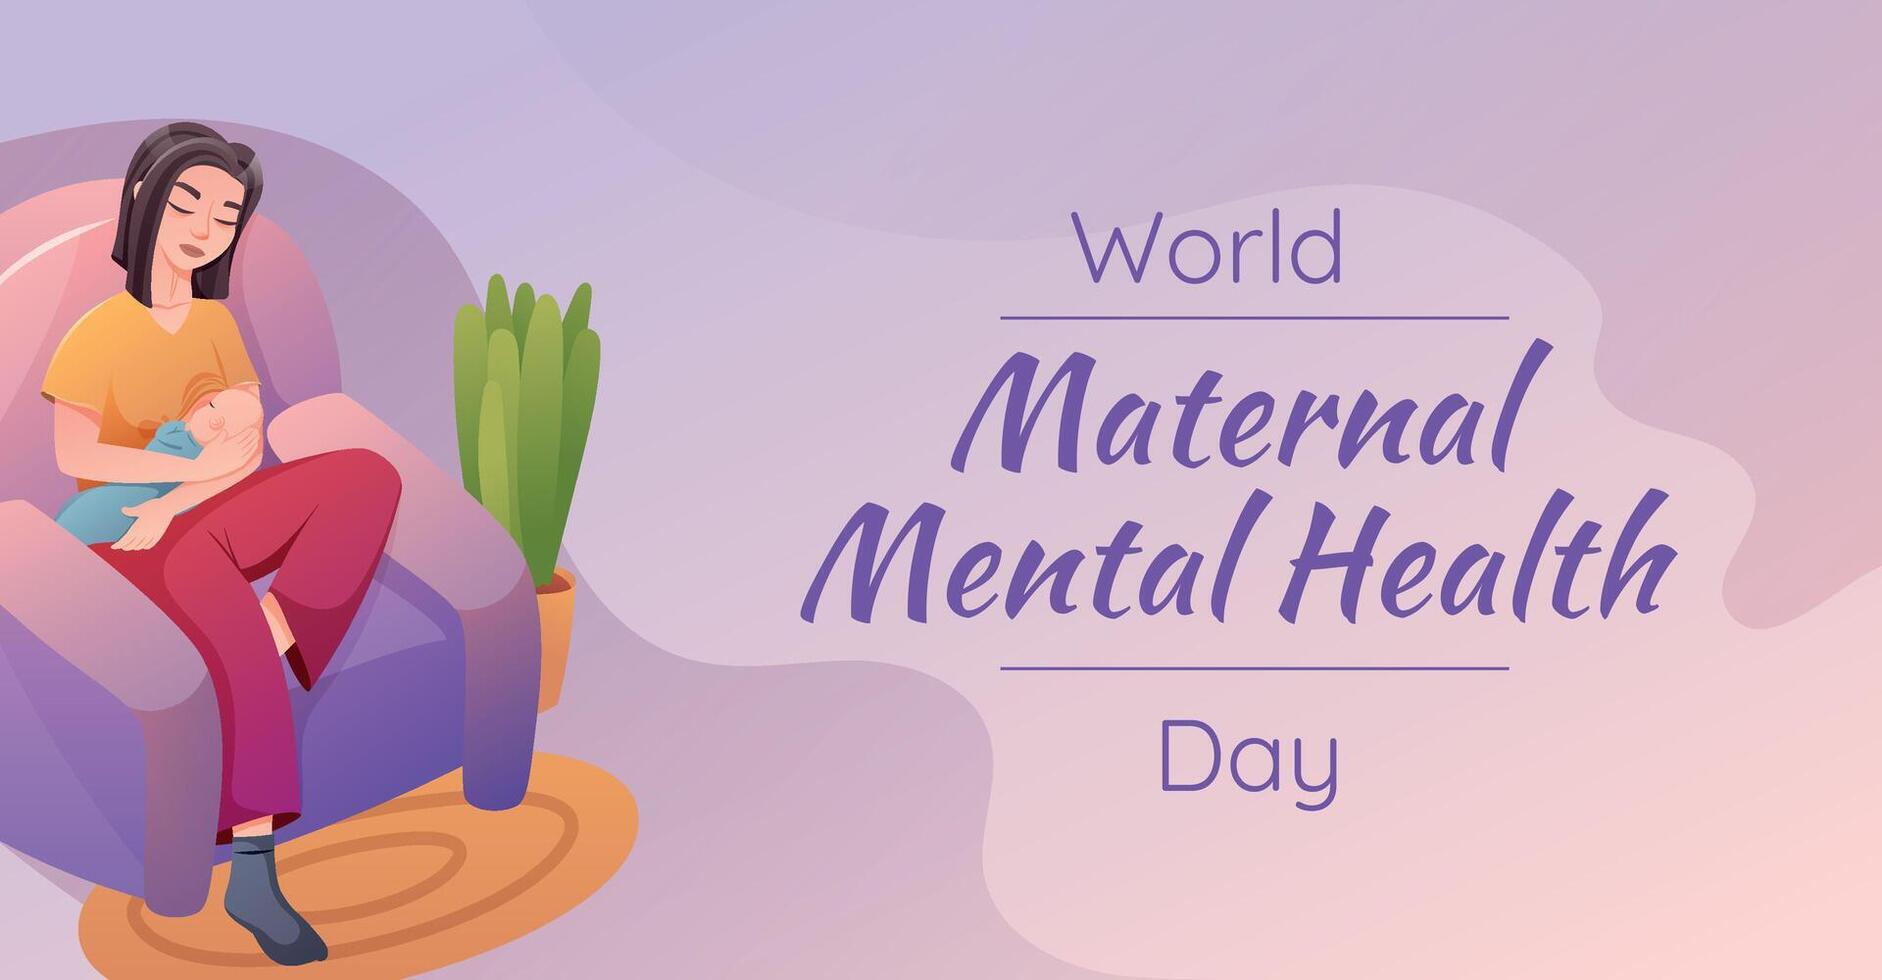 World Maternal Mental Health Day. horizontal holiday banner. Cartoon illustration of a woman with a newborn baby sitting in a chair and breastfeeding. vector